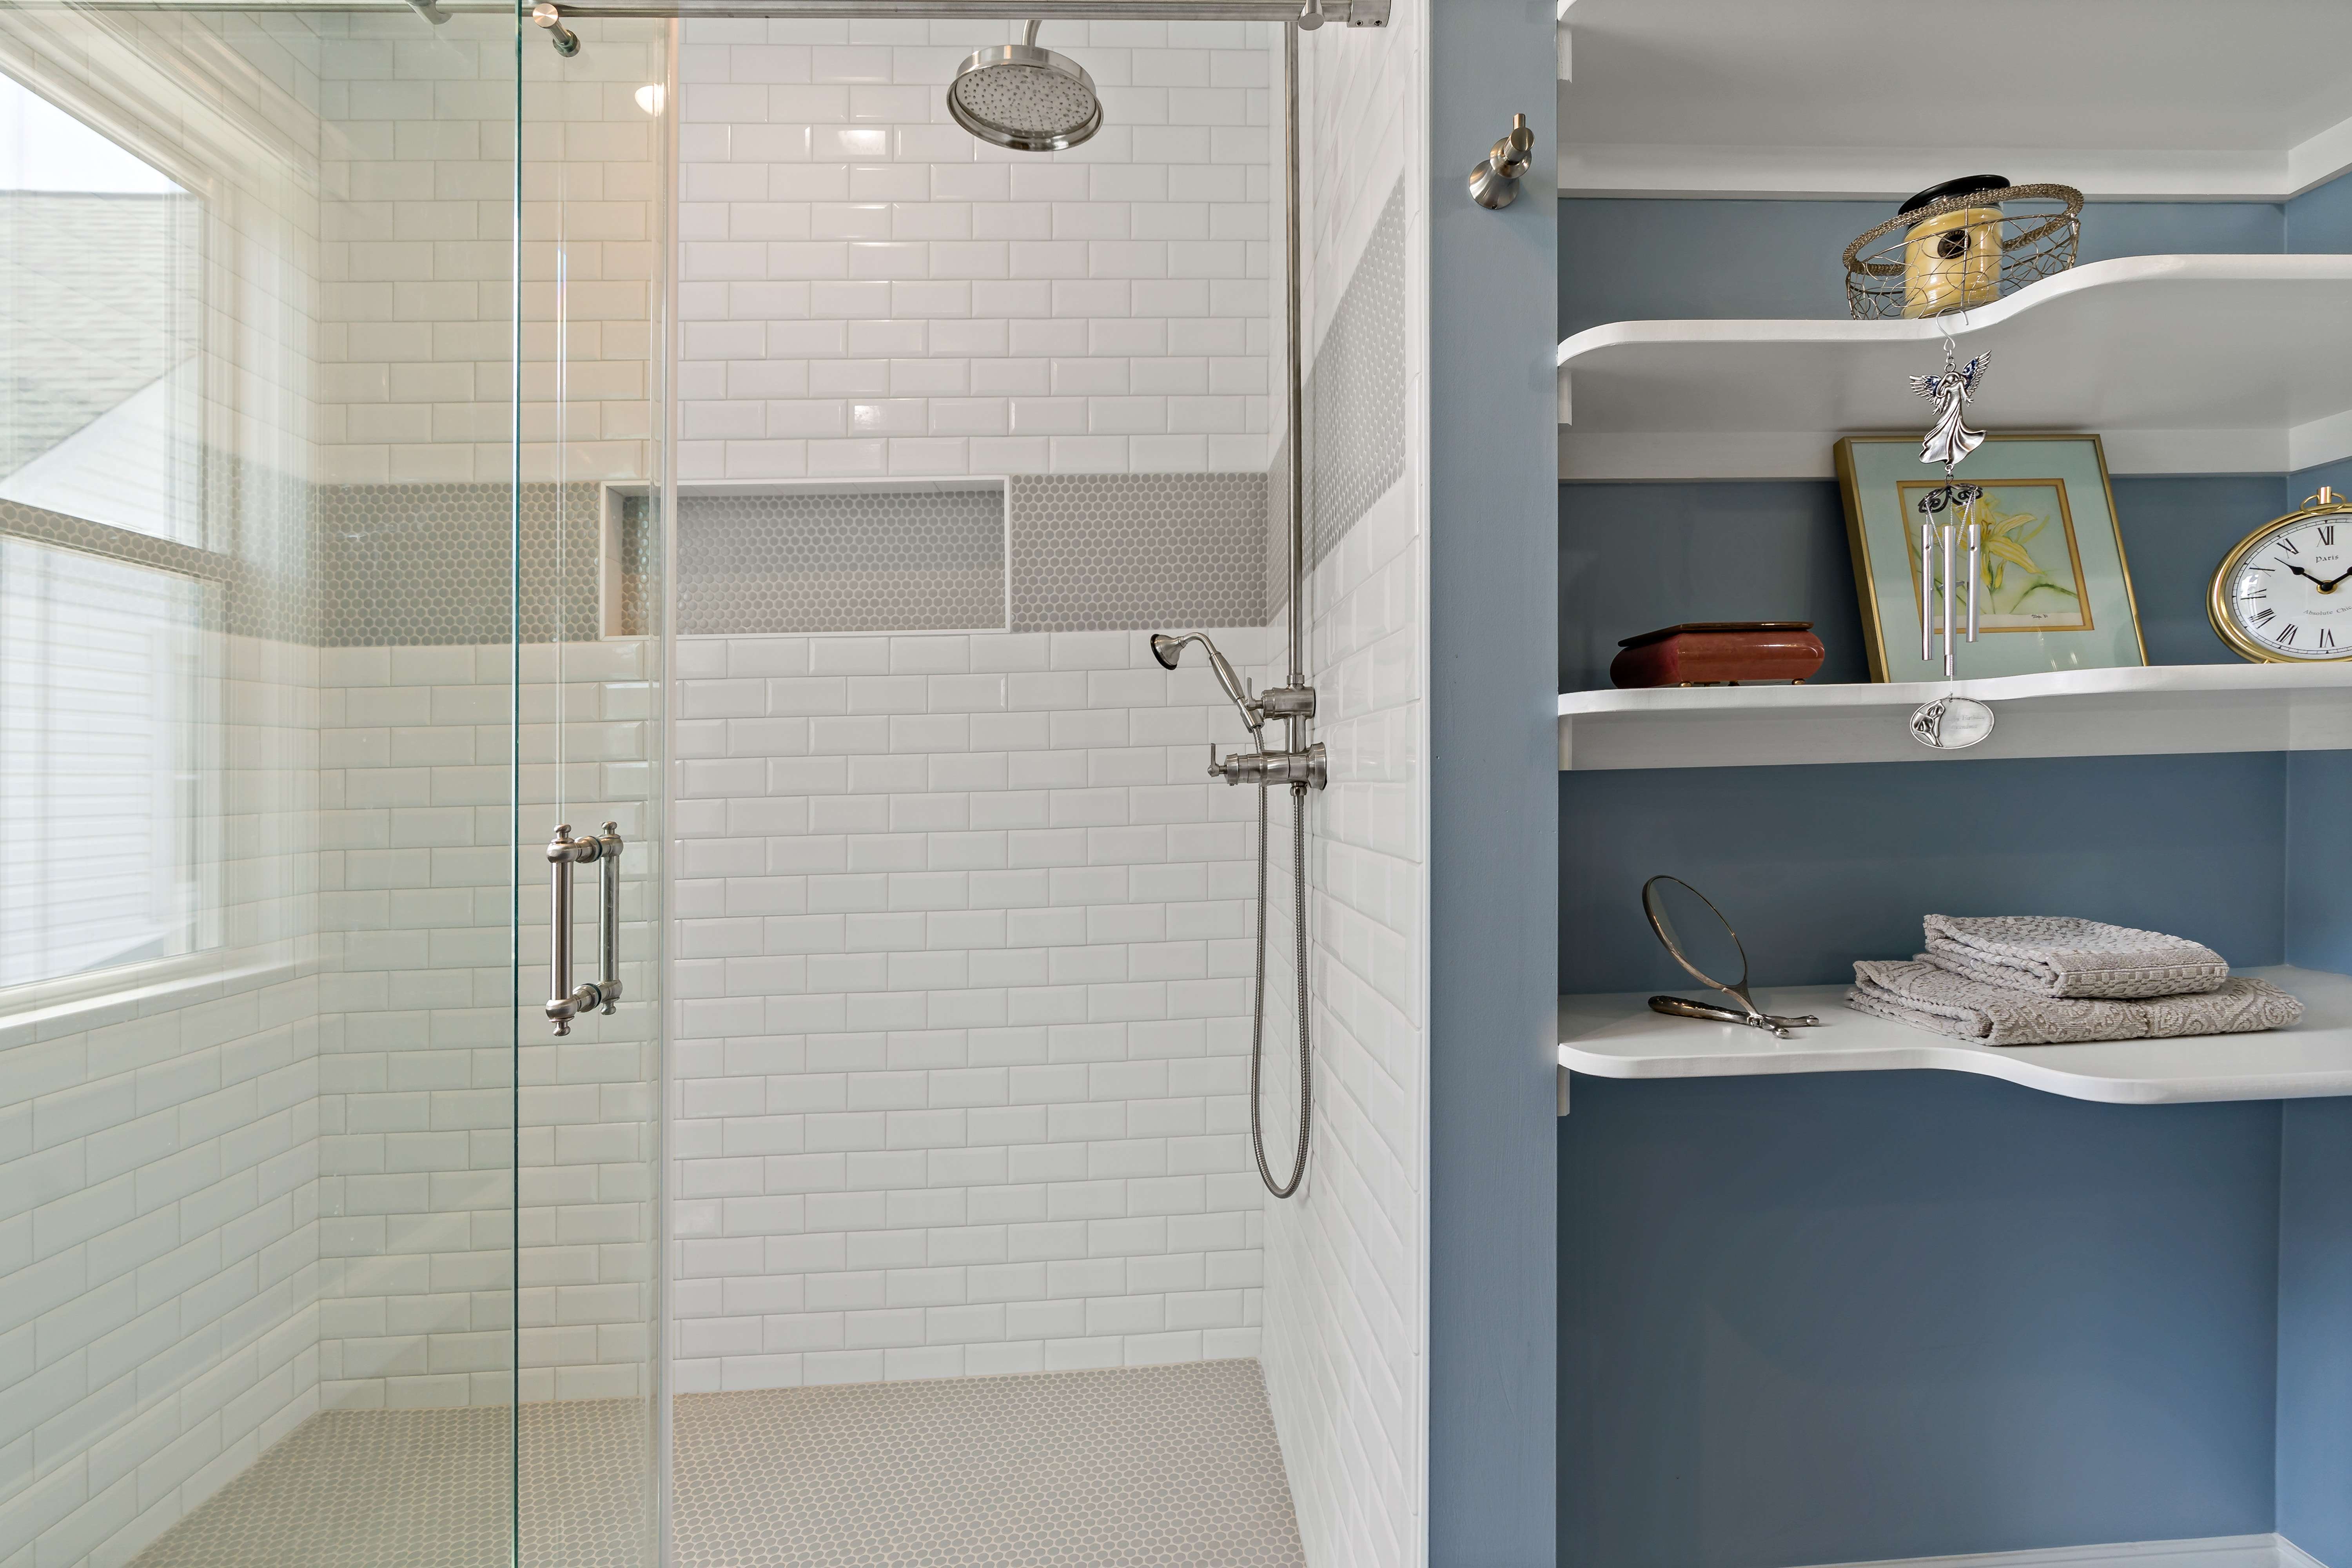 Standup shower with glass walls and built in shelves in bathroom